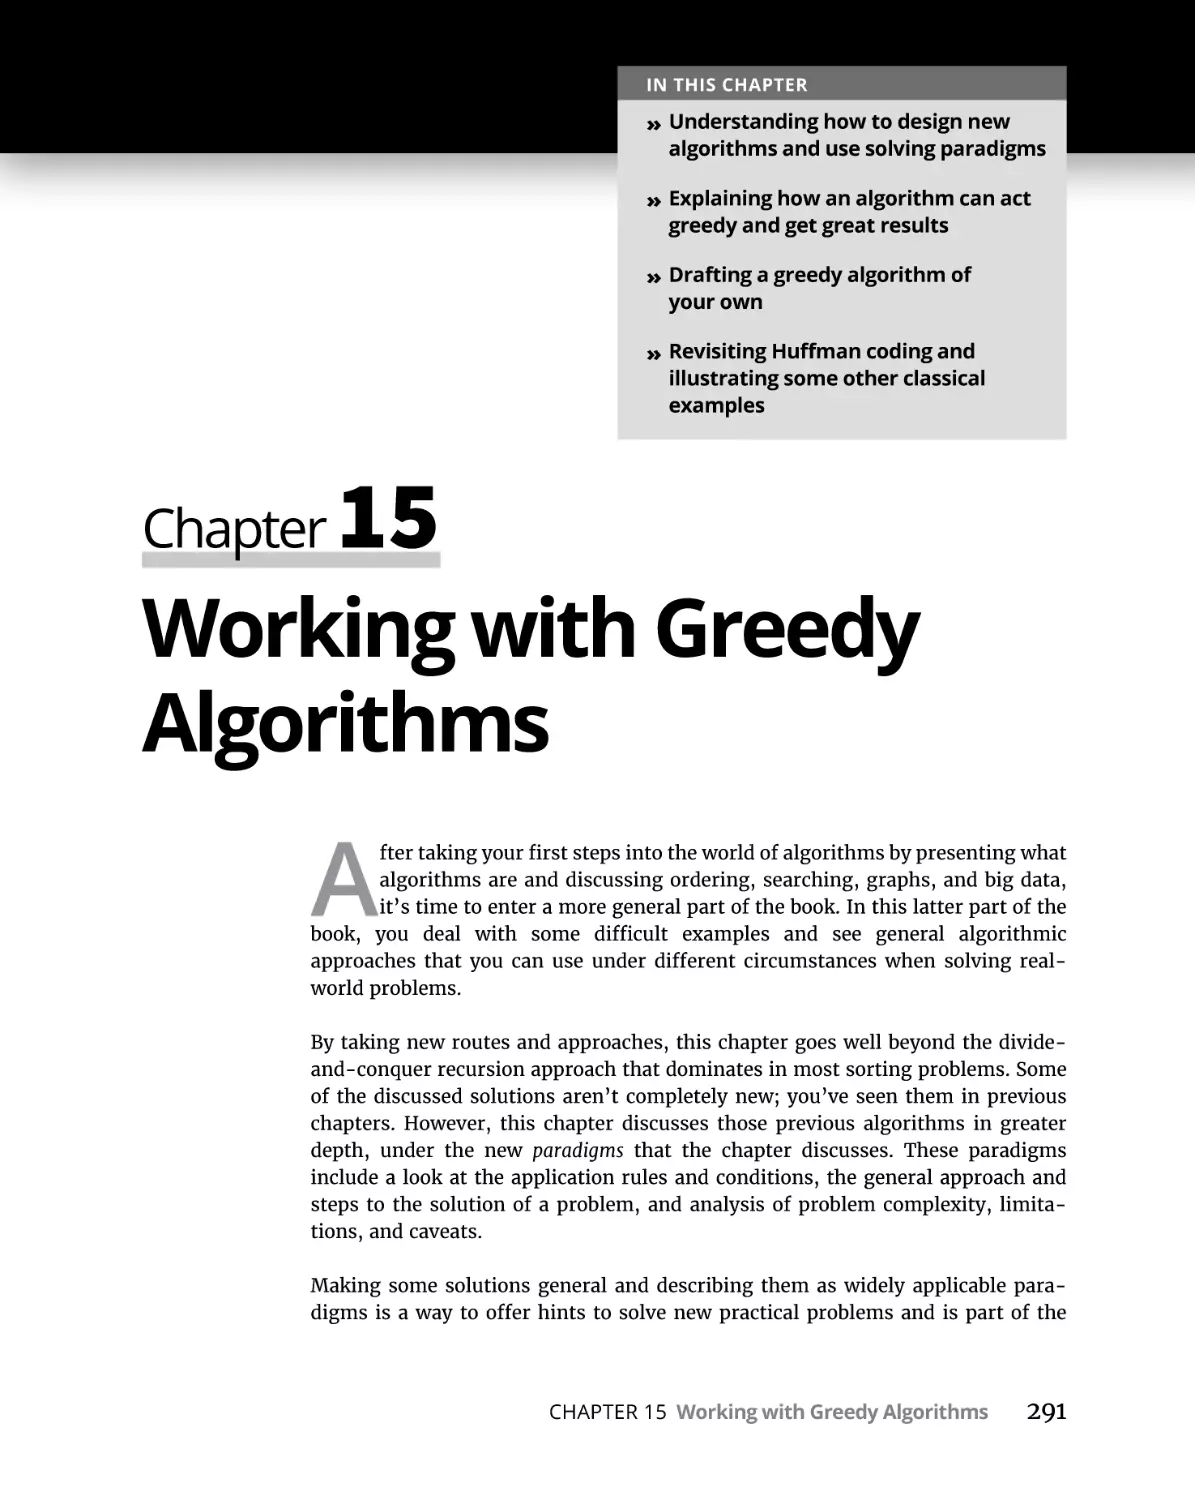 Chapter 15 Working with Greedy Algorithms